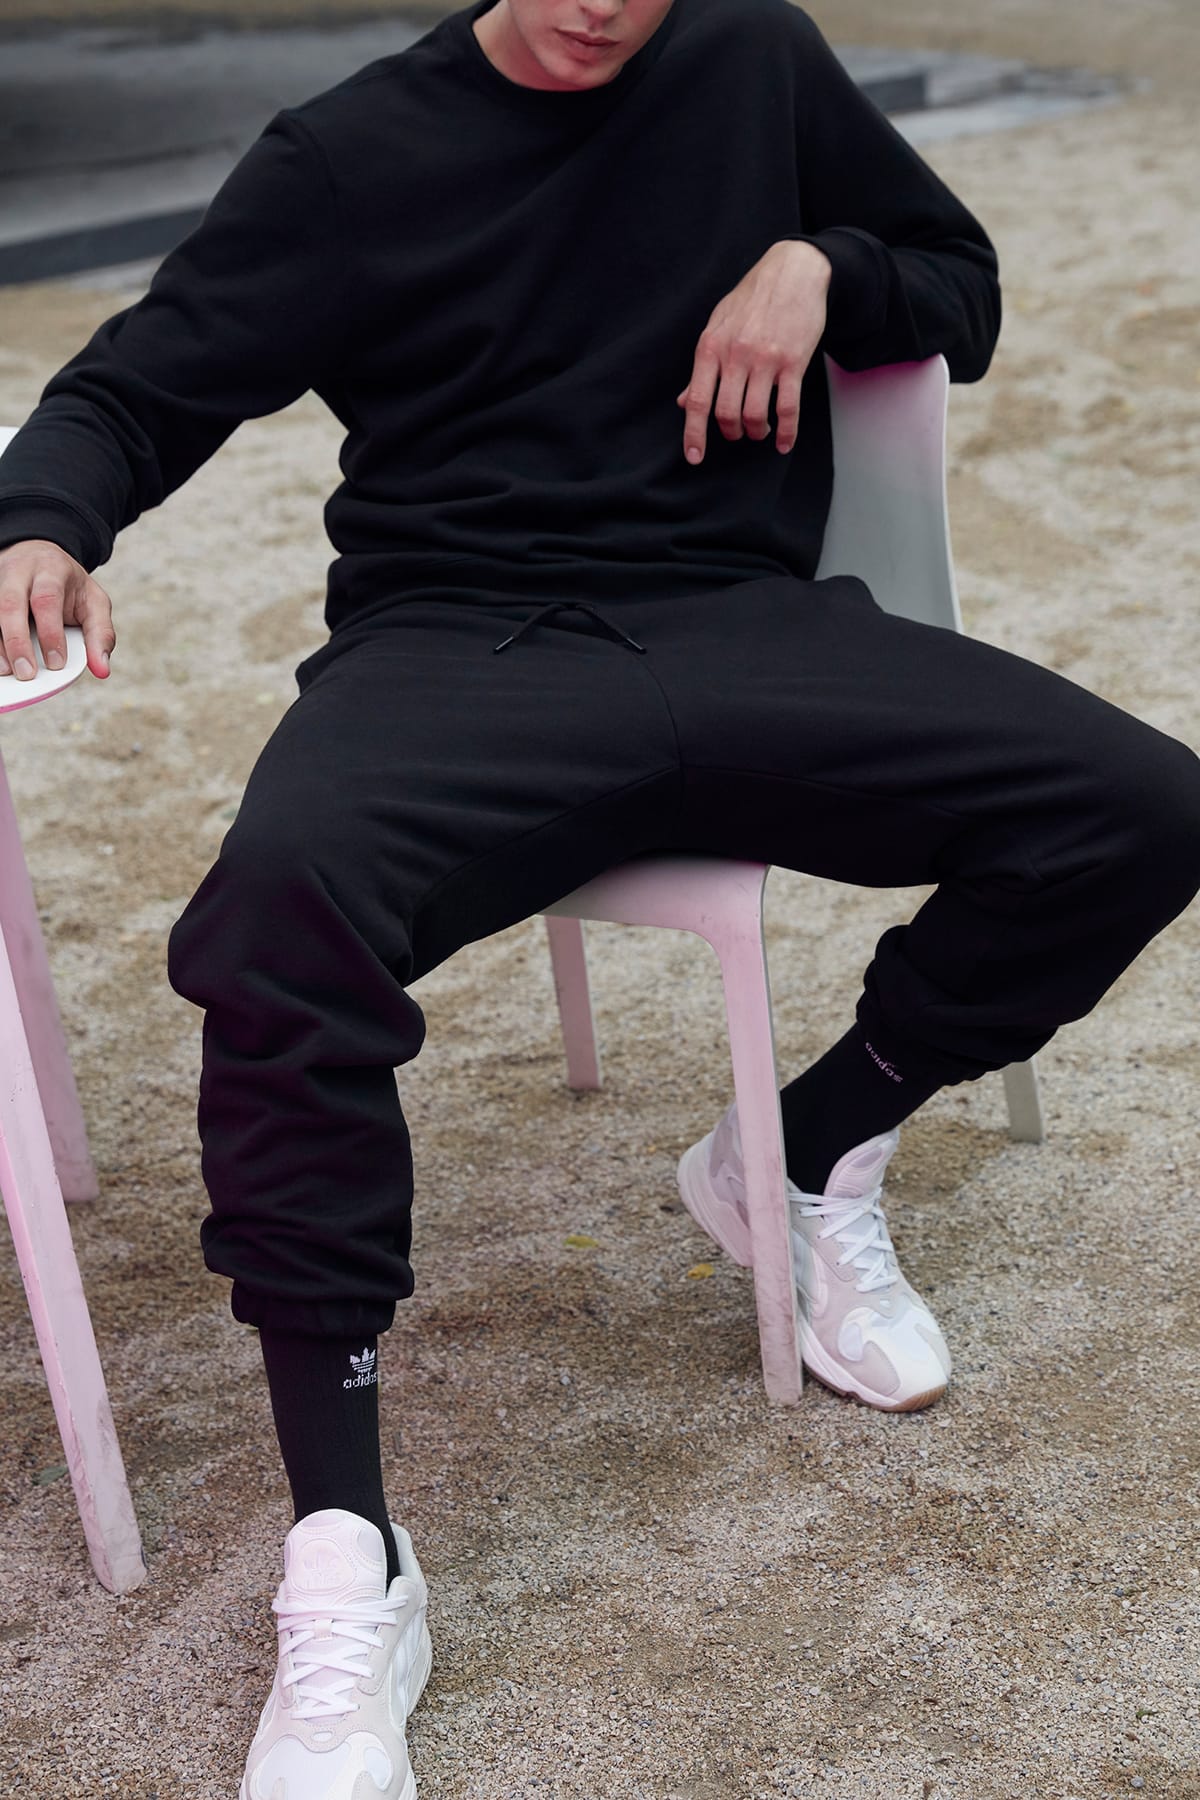 adidas hypebeast outfit